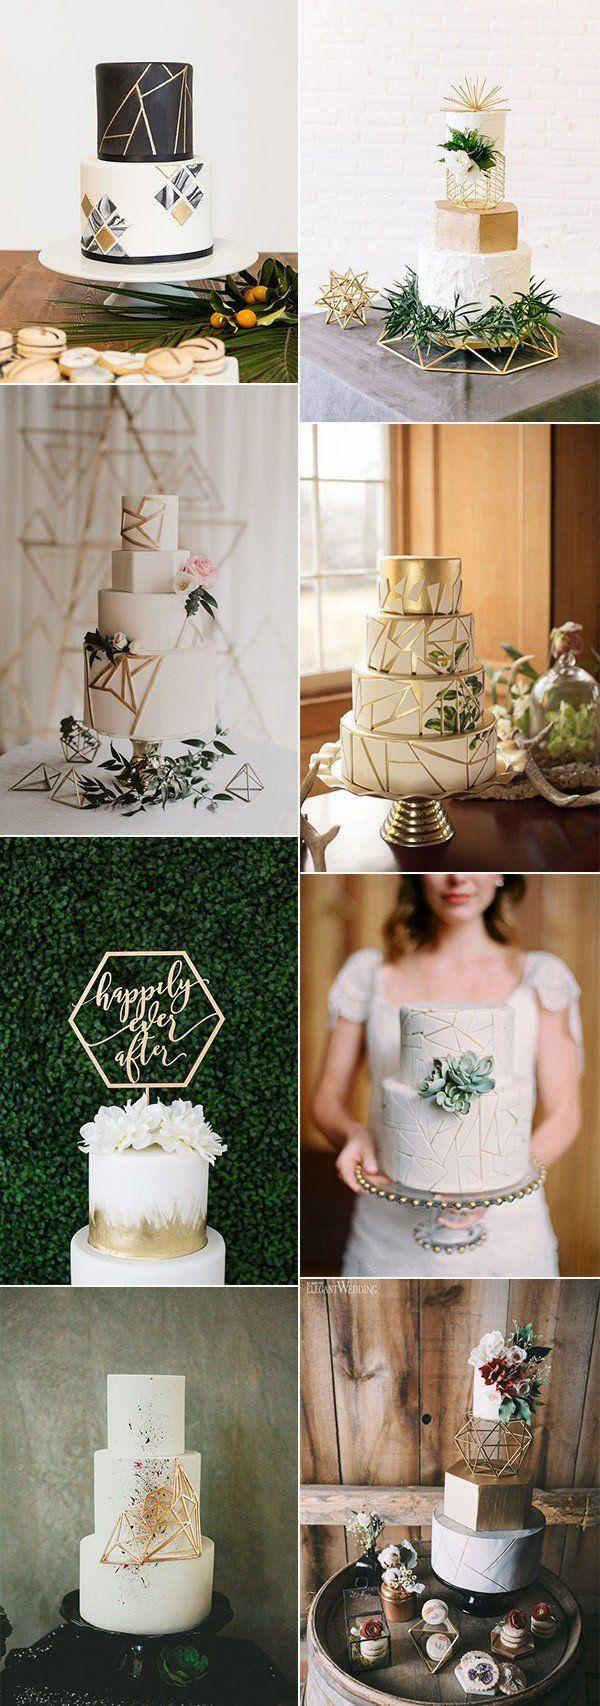 Hochzeit - 40  Chic Geometric Wedding Ideas For 2018 Trends - Page 5 Of 5